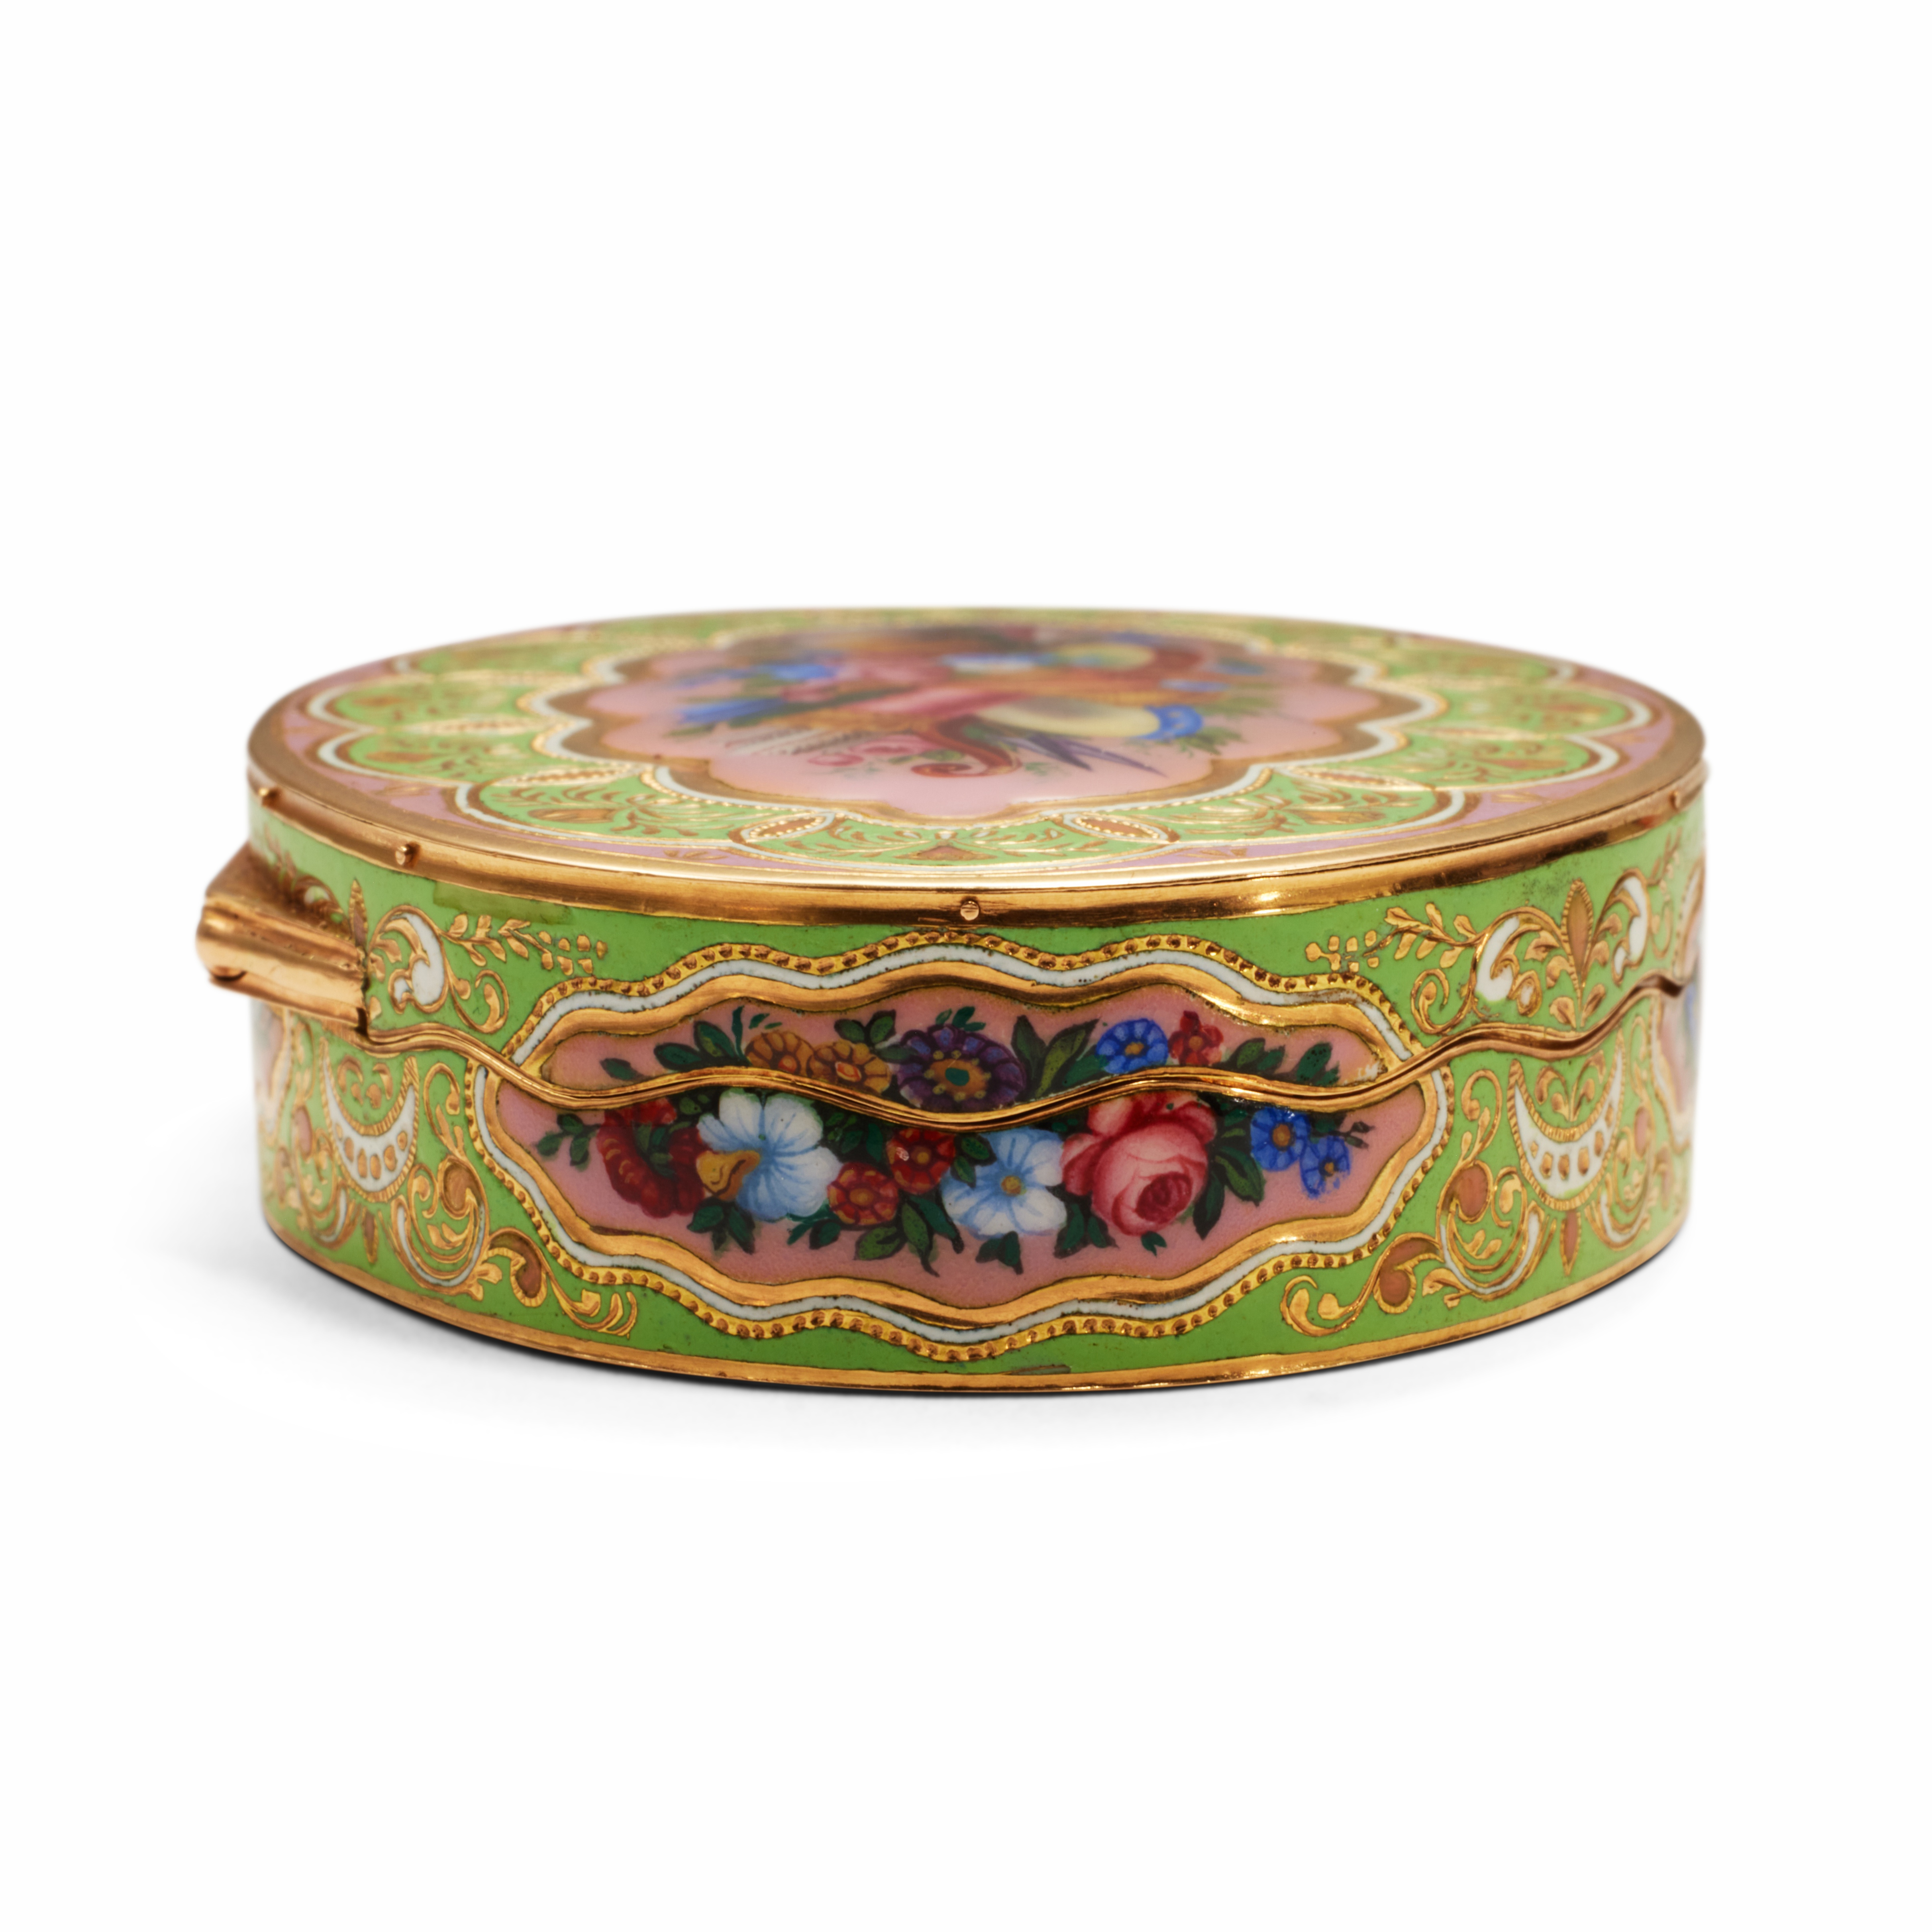 A Swiss Enameled Gold Snuff Box For The Turkish Market, Probably Geneva, Circa 1830 - Image 5 of 5